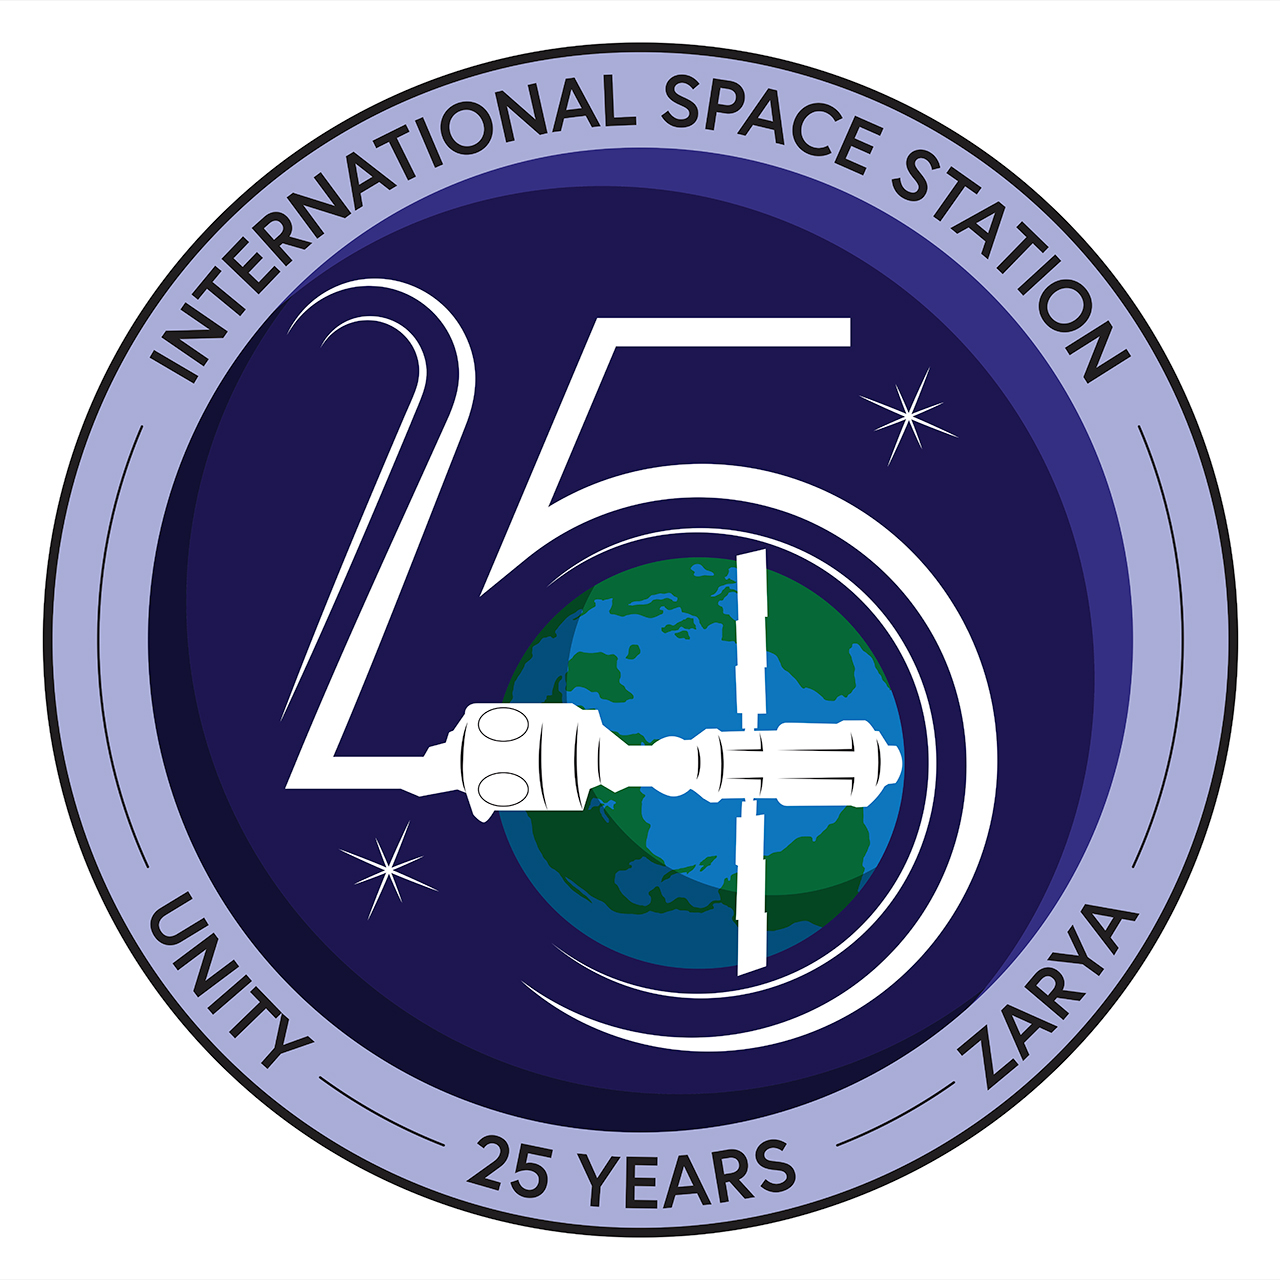 a circular patch showing an illustration of the international space station with earth in the background.